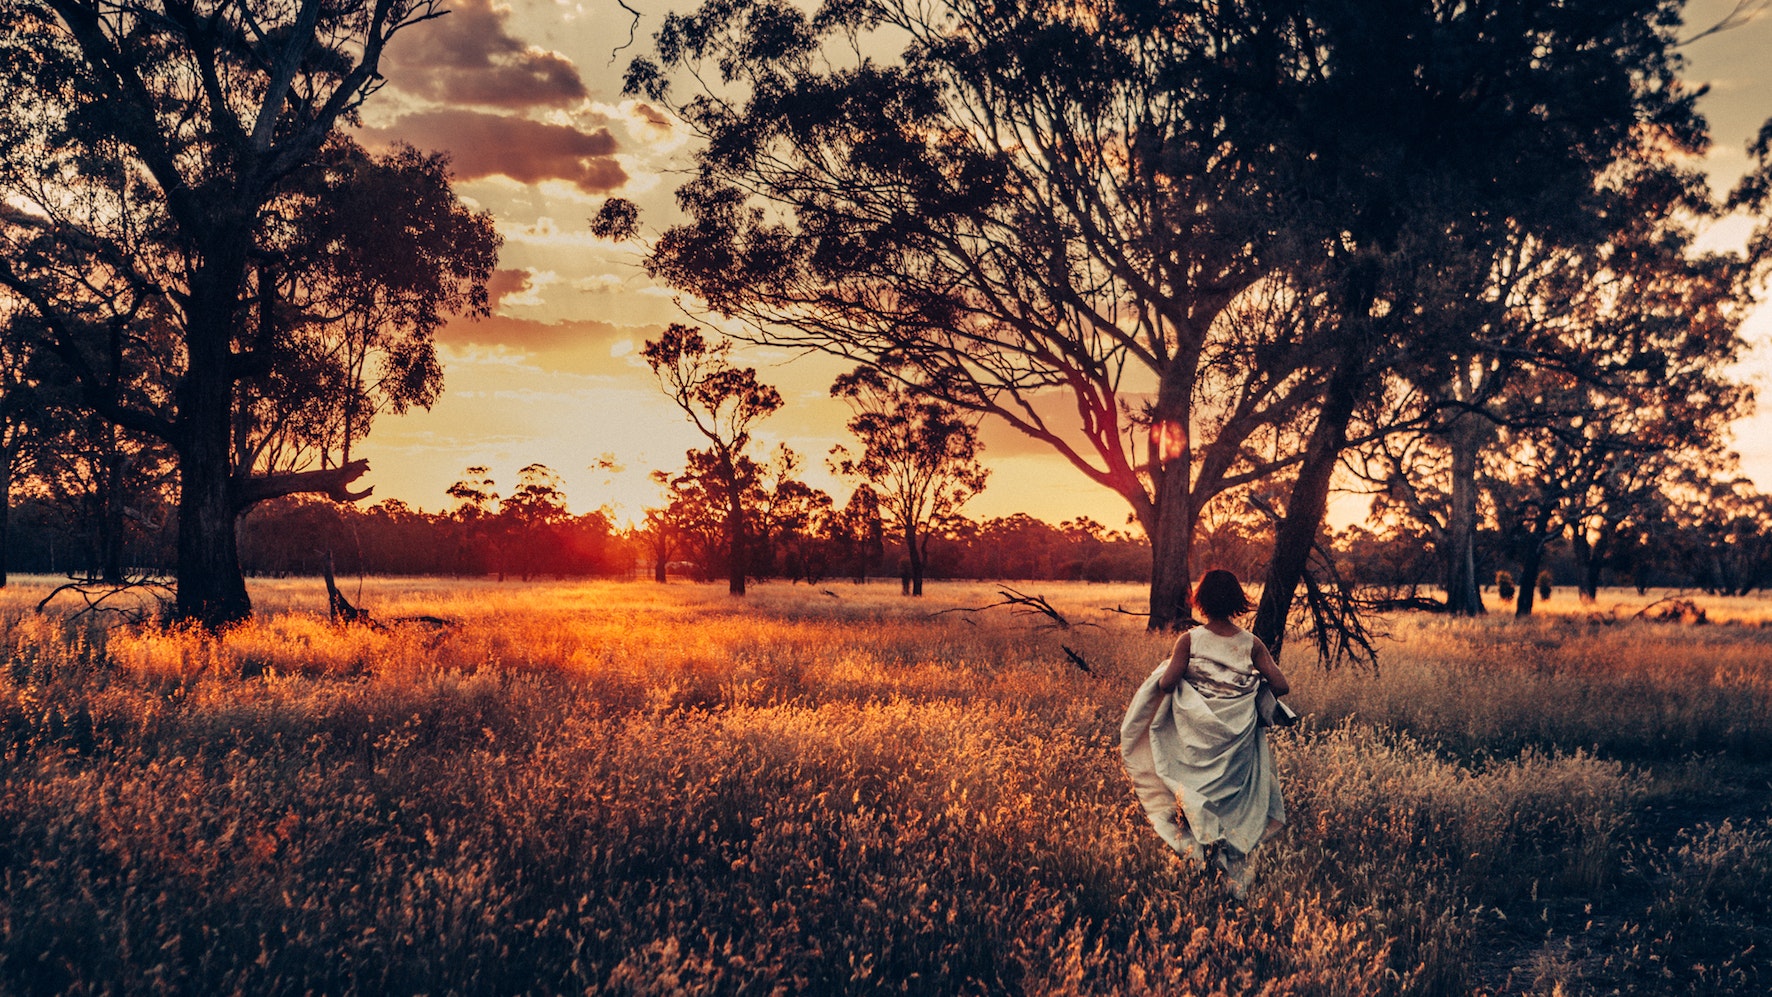 A dancer in a white dress walking through bushland during a sunset